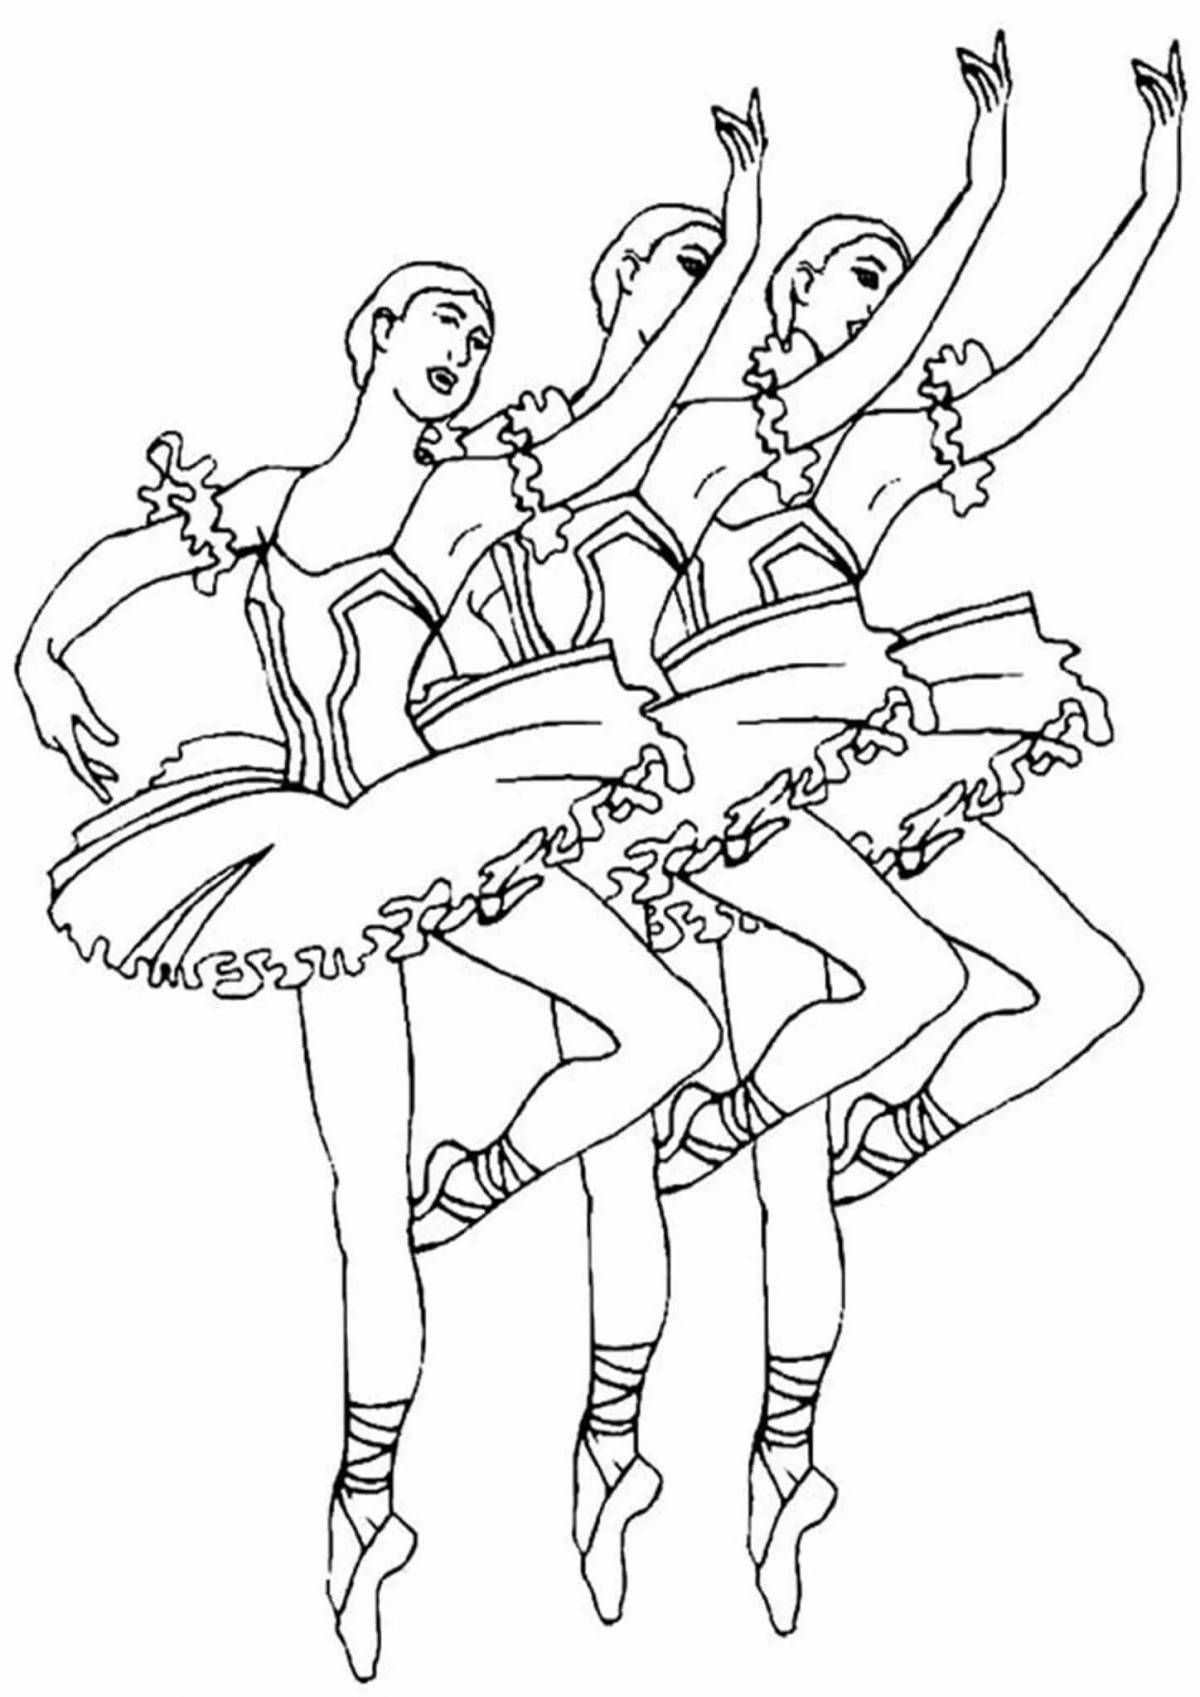 Shining swan lake coloring pages for kids